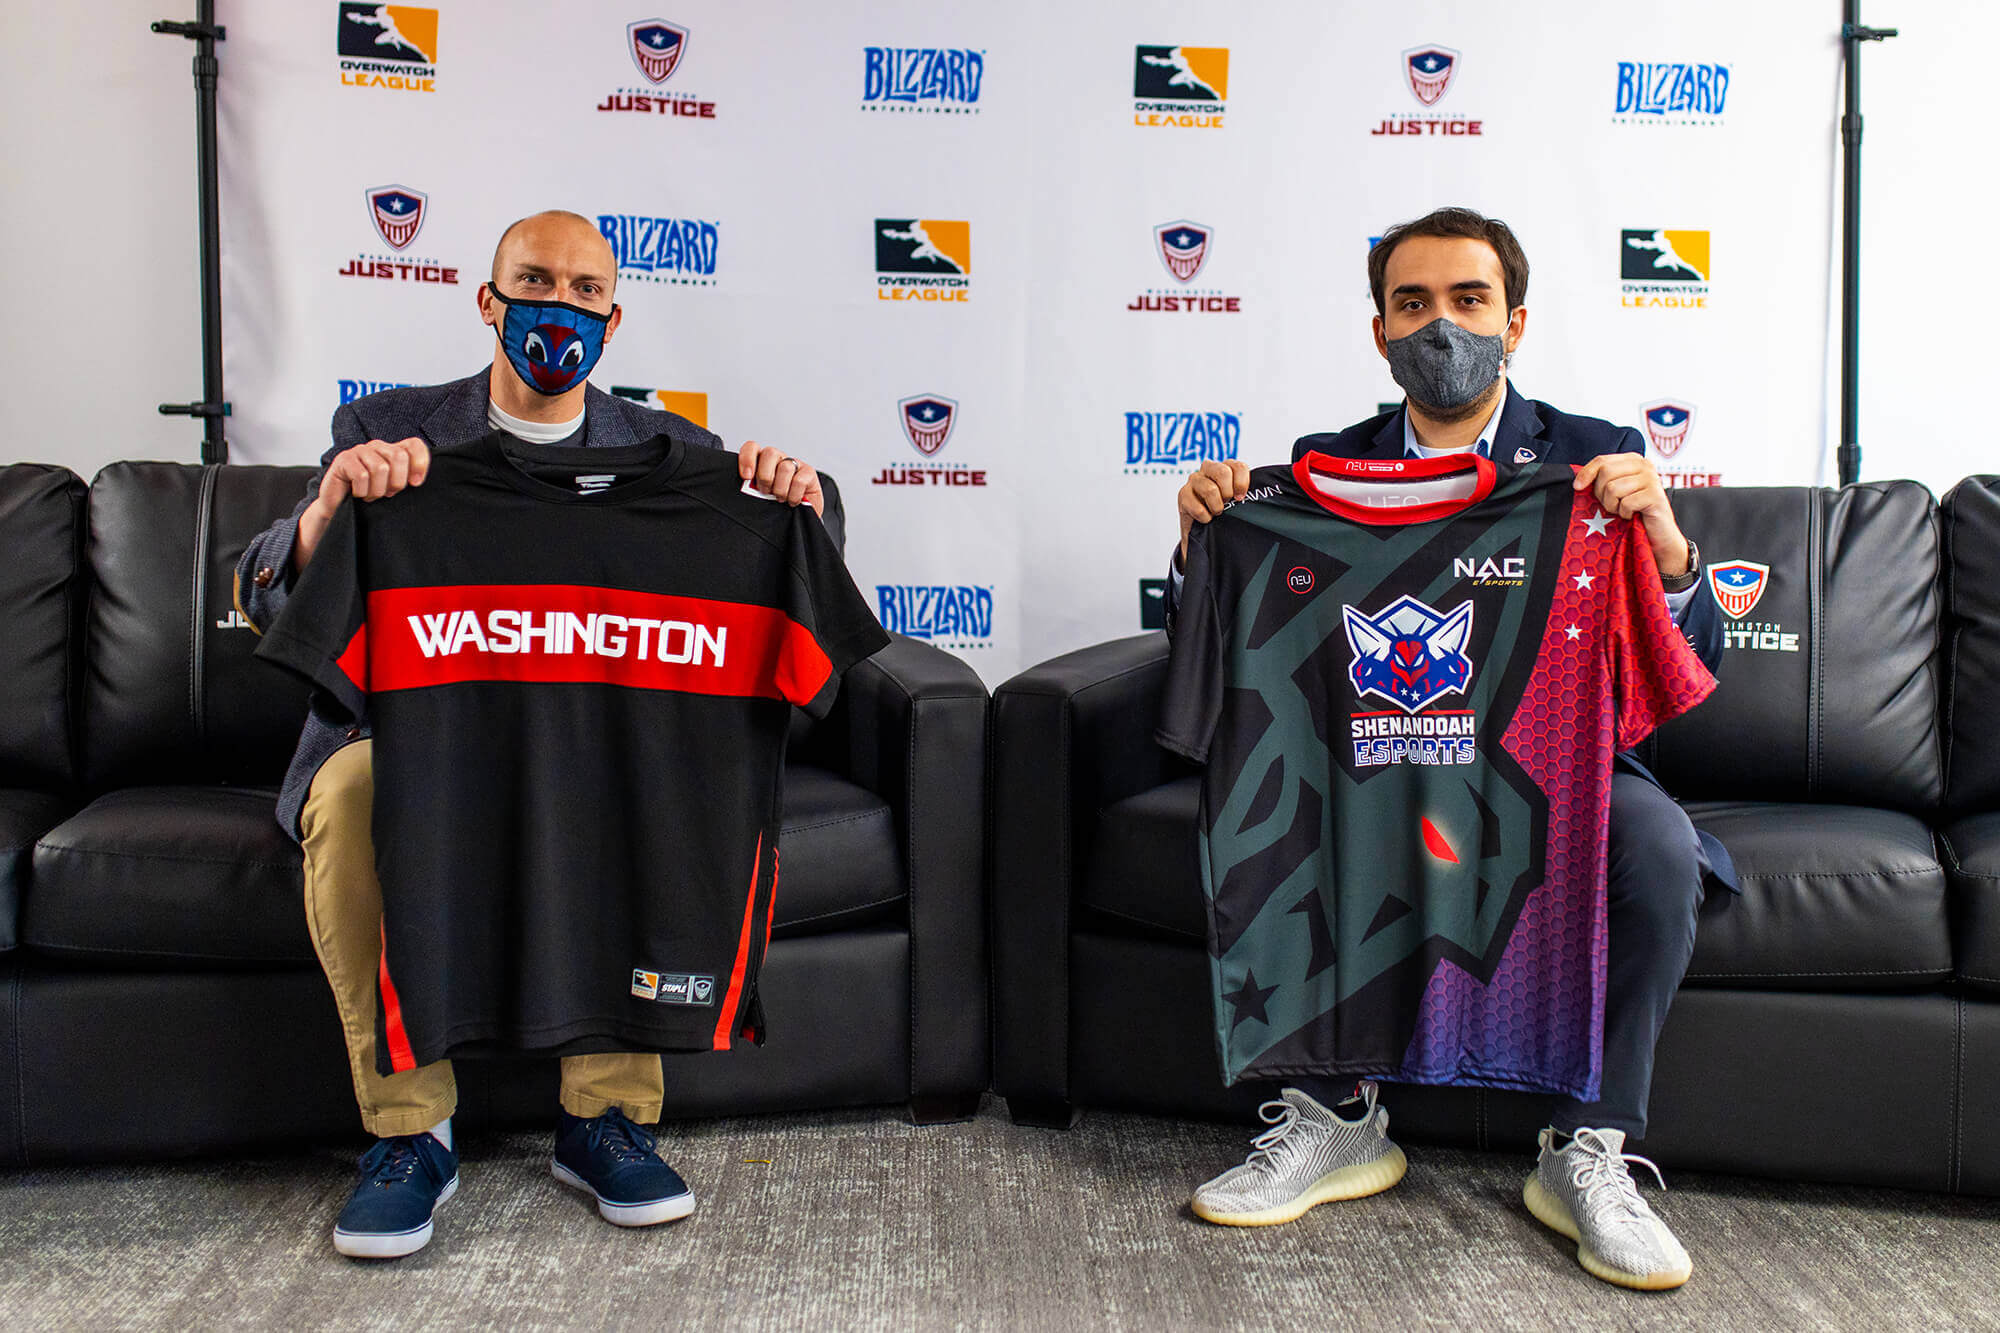 Shenandoah & Washington Justice Team Up in New Esports Partnership Partnership offers students real-world experience in the growing esports industry